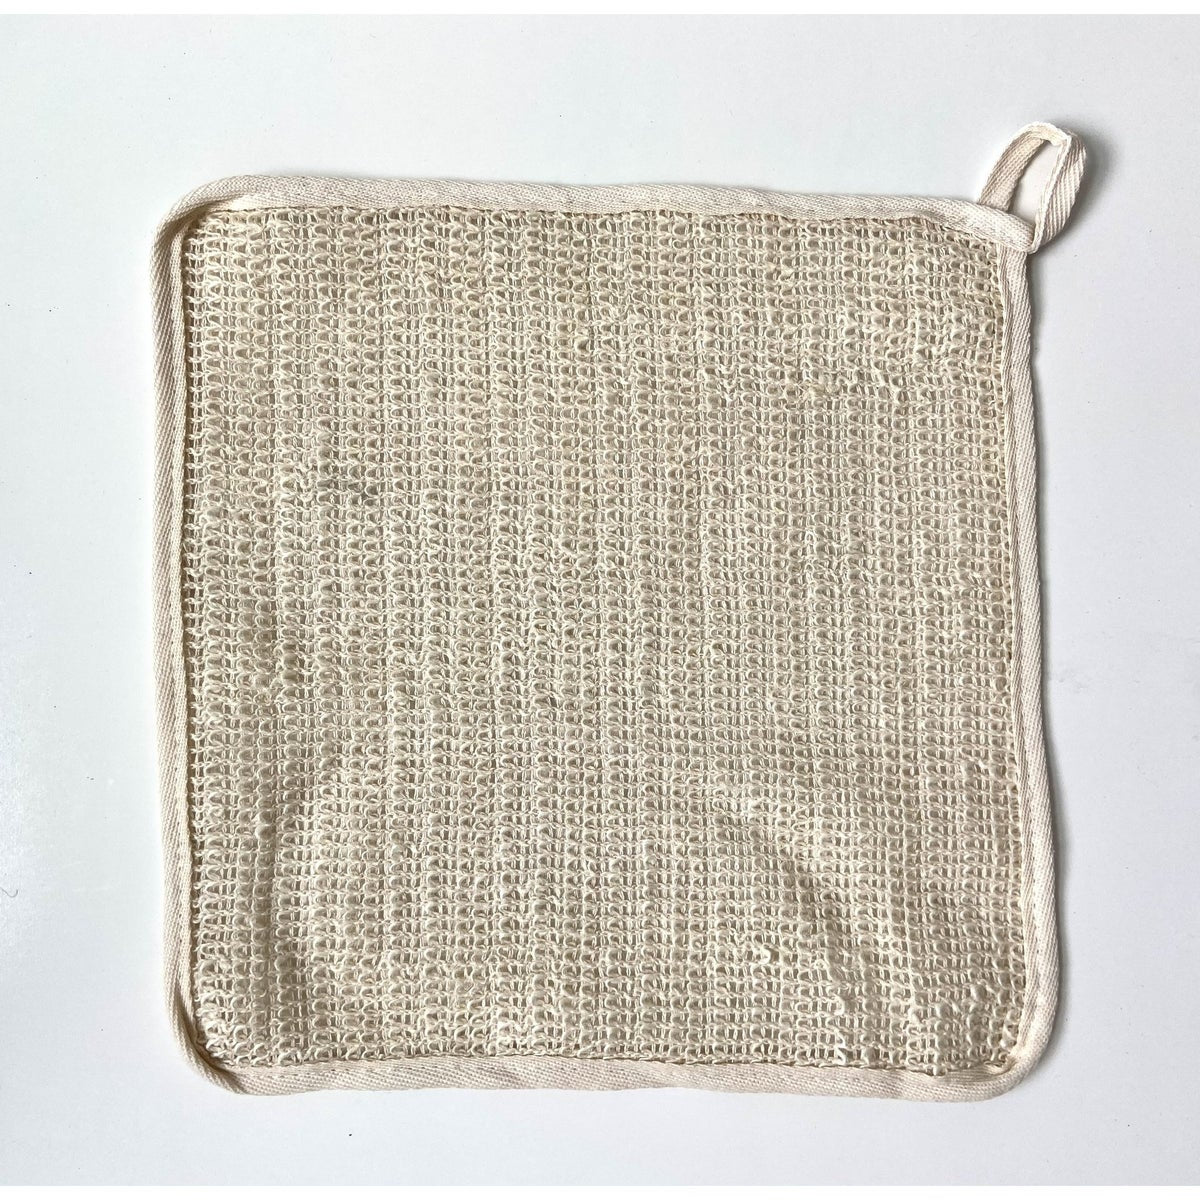 Cream colored washcloth on a white background.